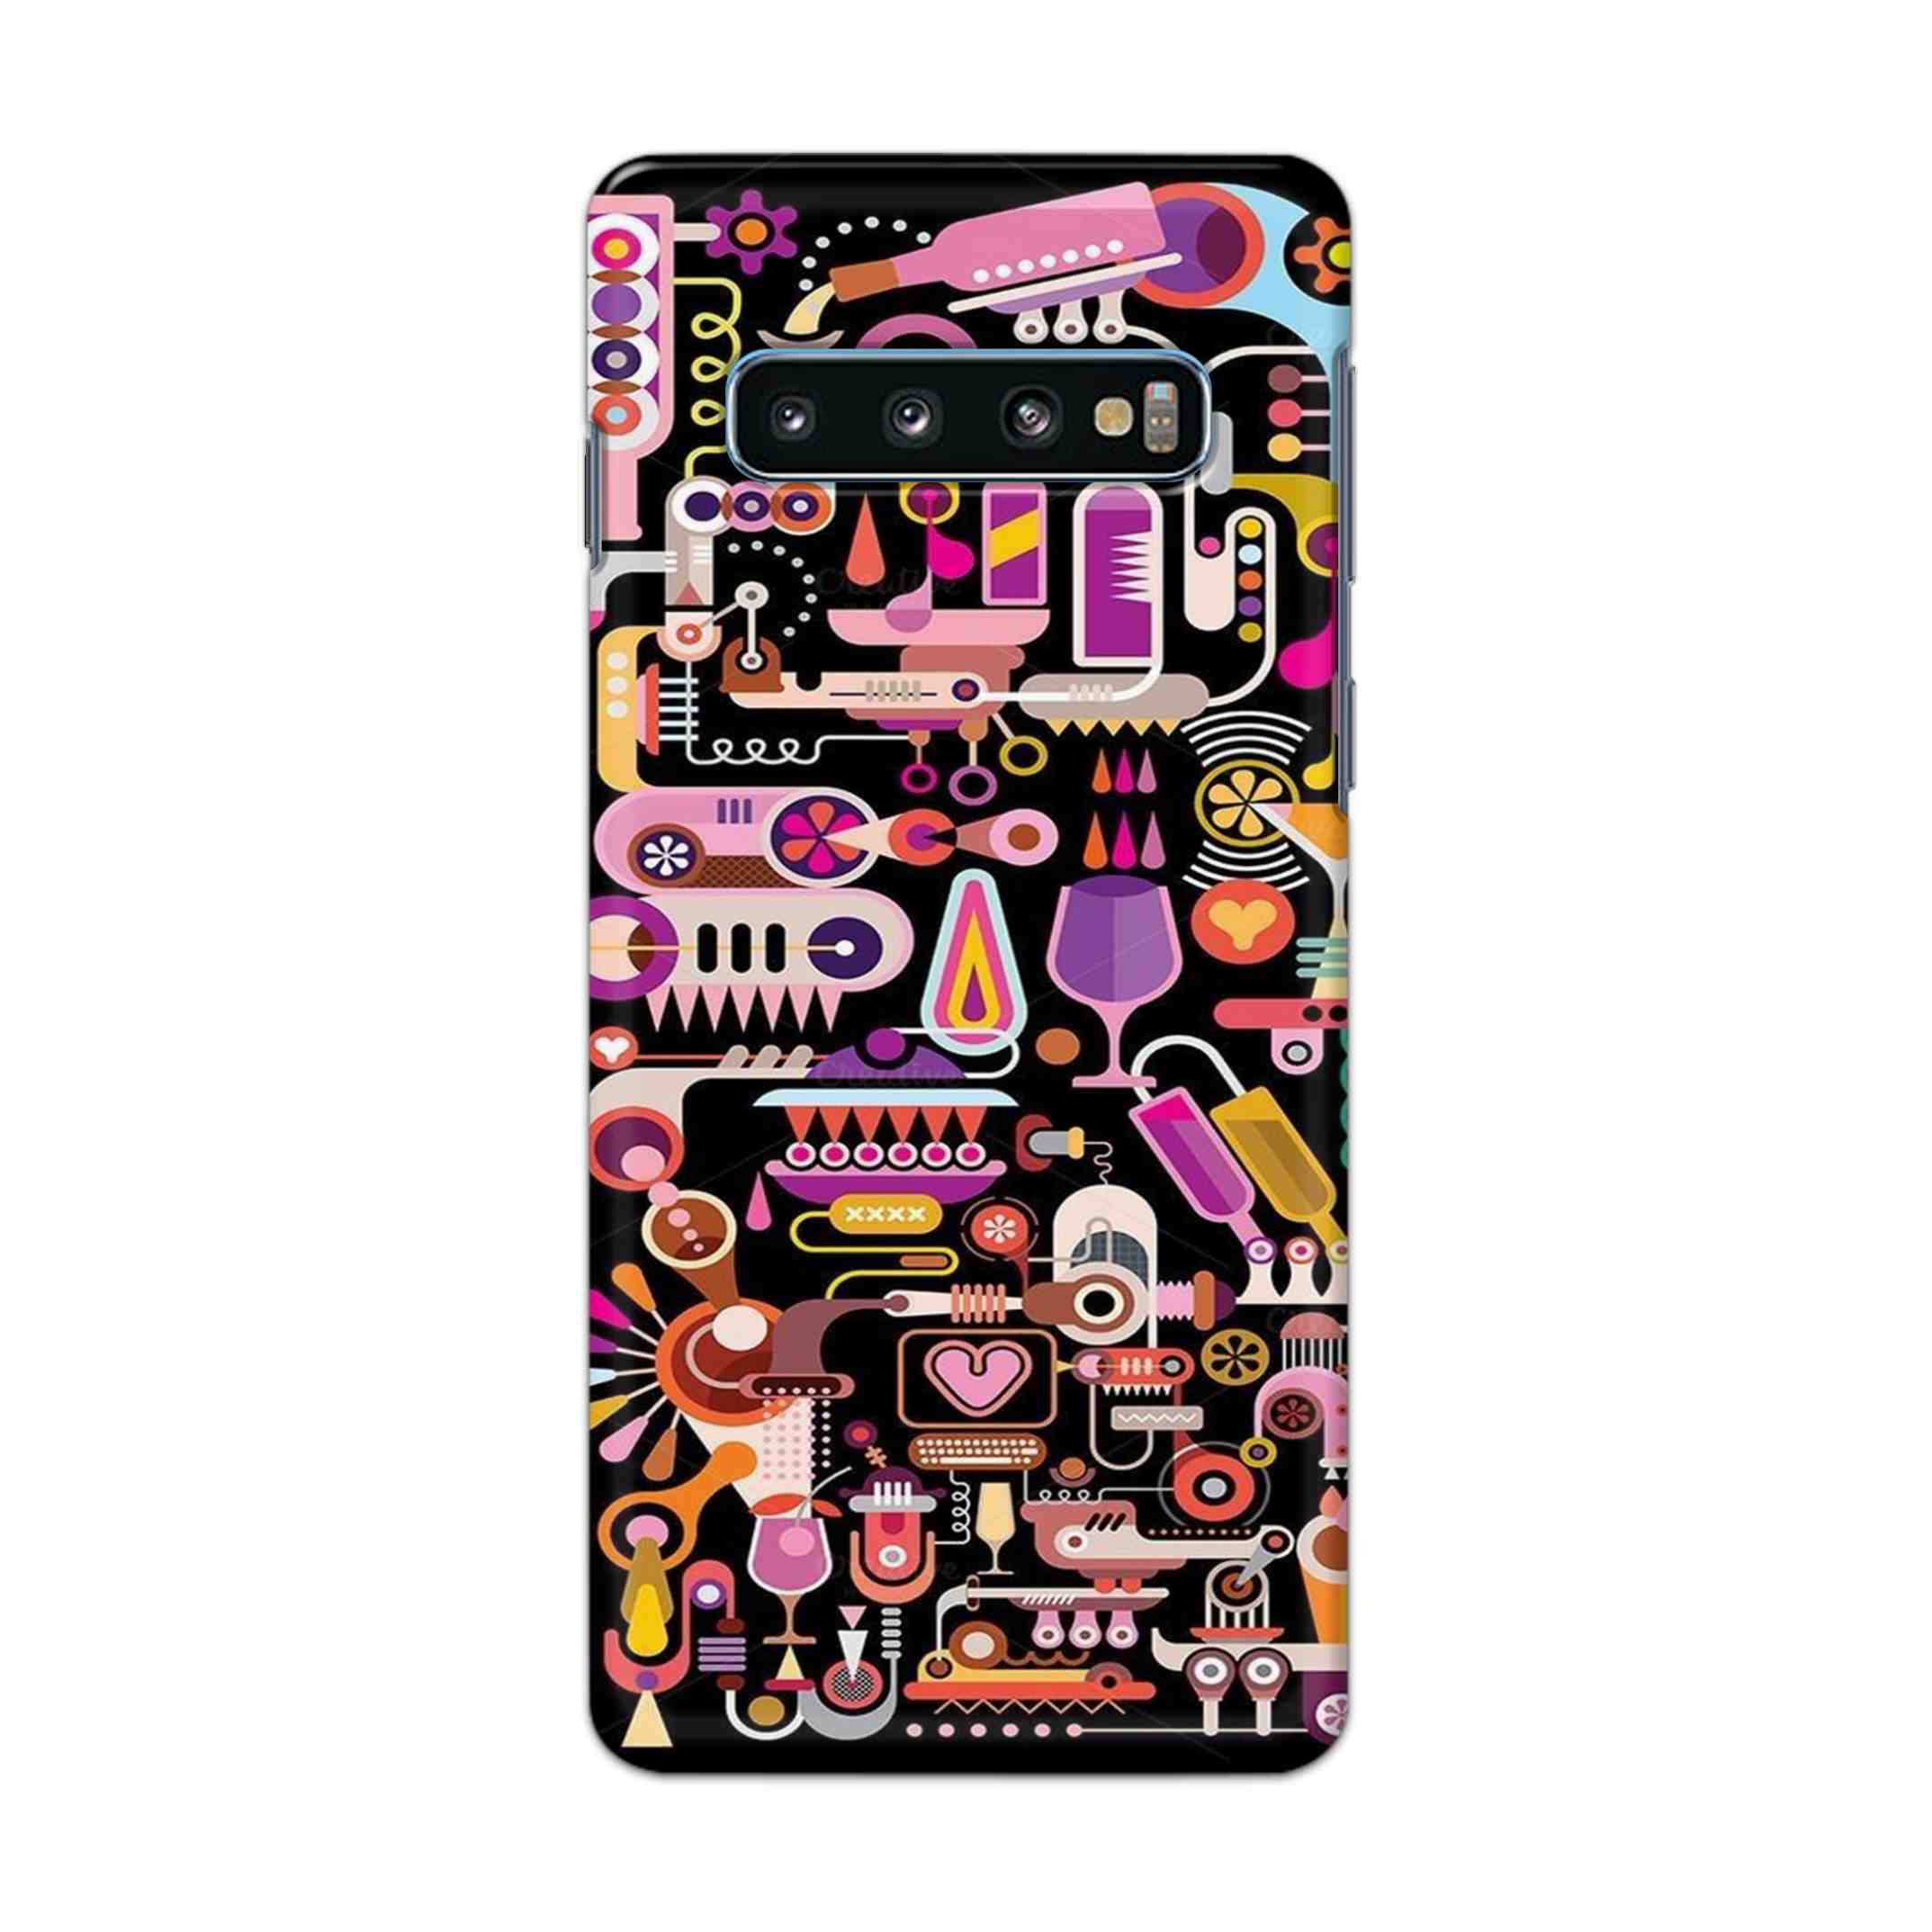 Buy Lab Art Hard Back Mobile Phone Case Cover For Samsung Galaxy S10 Online